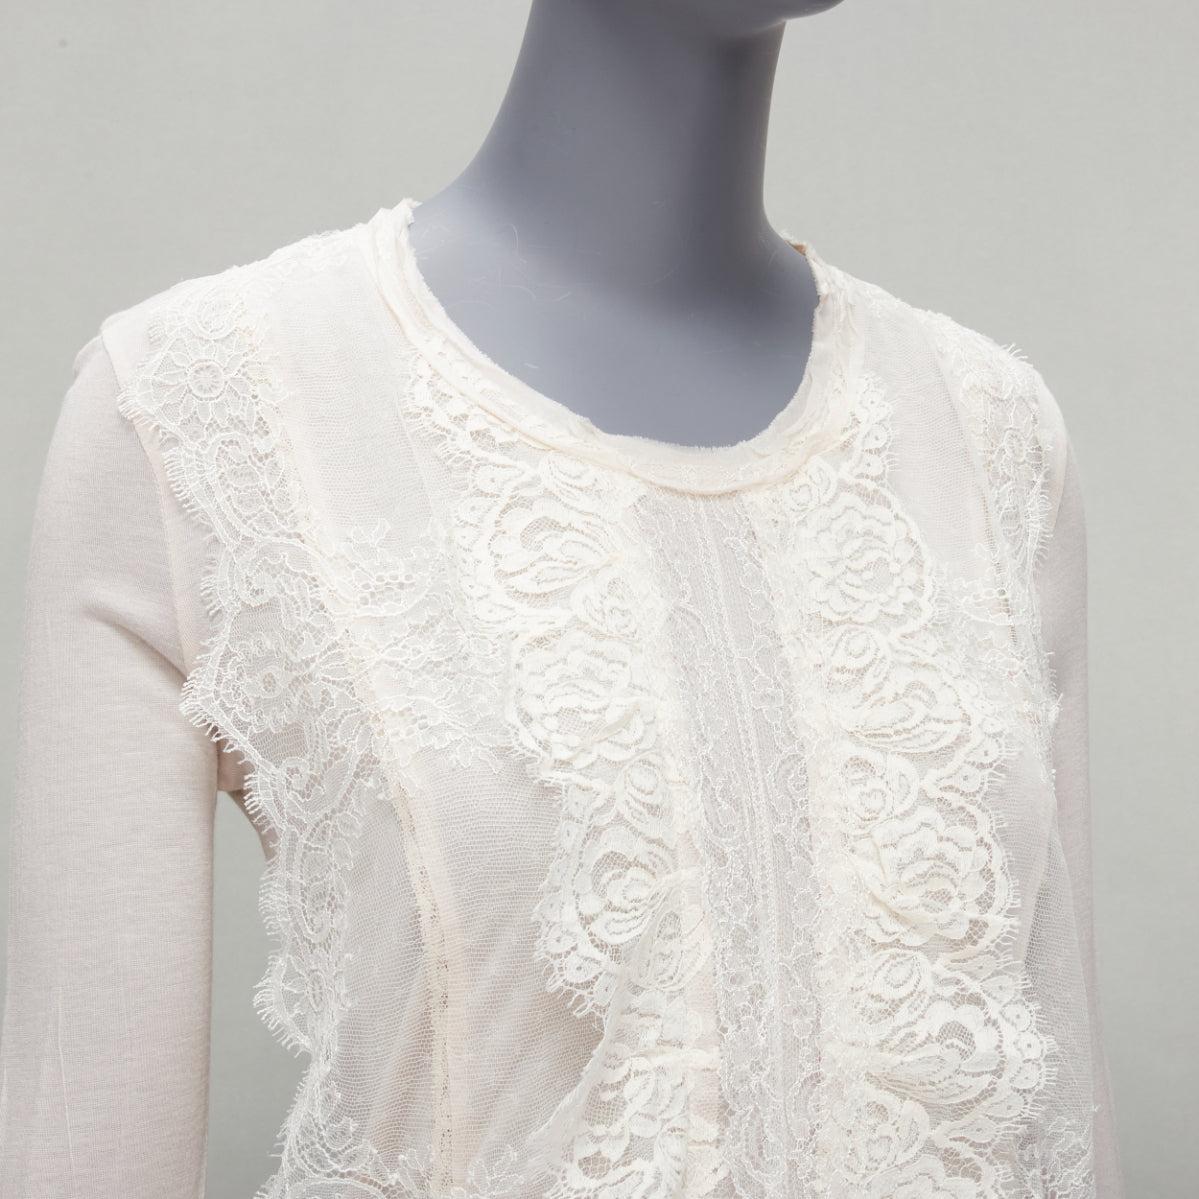 LANVIN off white lace overlay asymmetric cropped 3/4 sleeve top FR32 XXS
Reference: SNKO/A00231
Brand: Lanvin
Designer: Alber Elbaz
Material: Viscose
Color: Off White
Pattern: Solid
Closure: Pullover
Made in: India

CONDITION:
Condition: Very good,